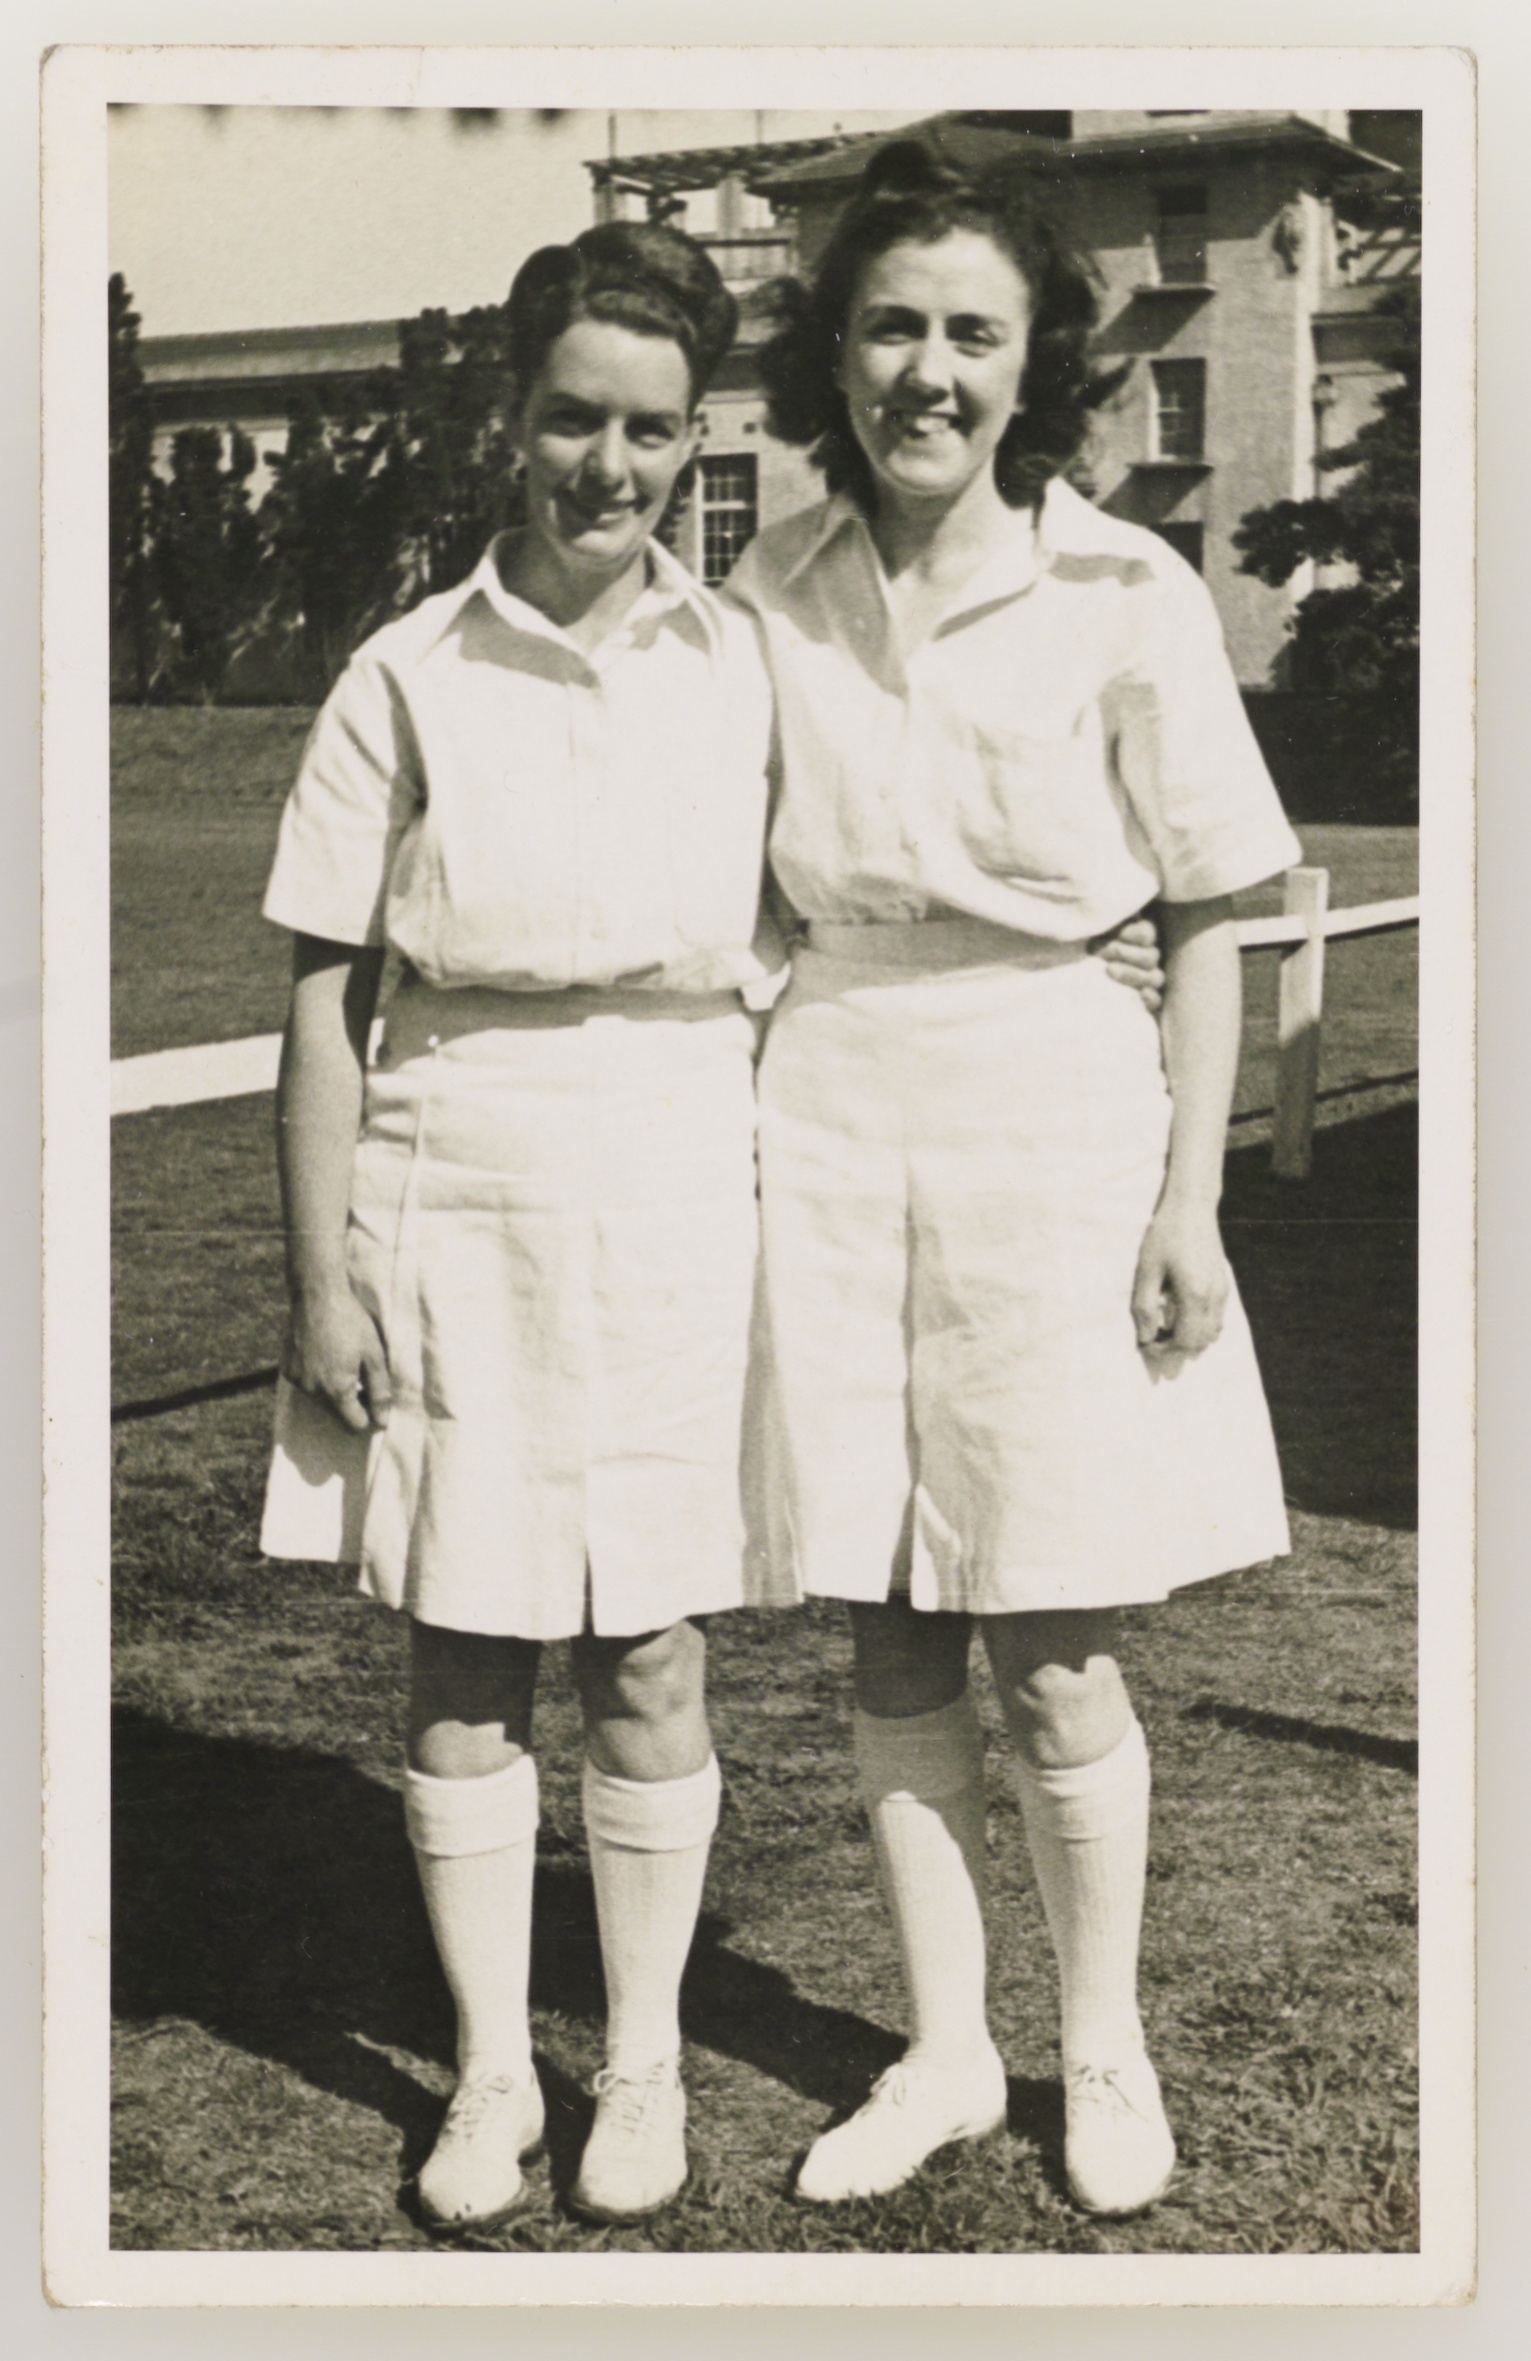 Lorna Thomas, left, with a team member, c 1940s